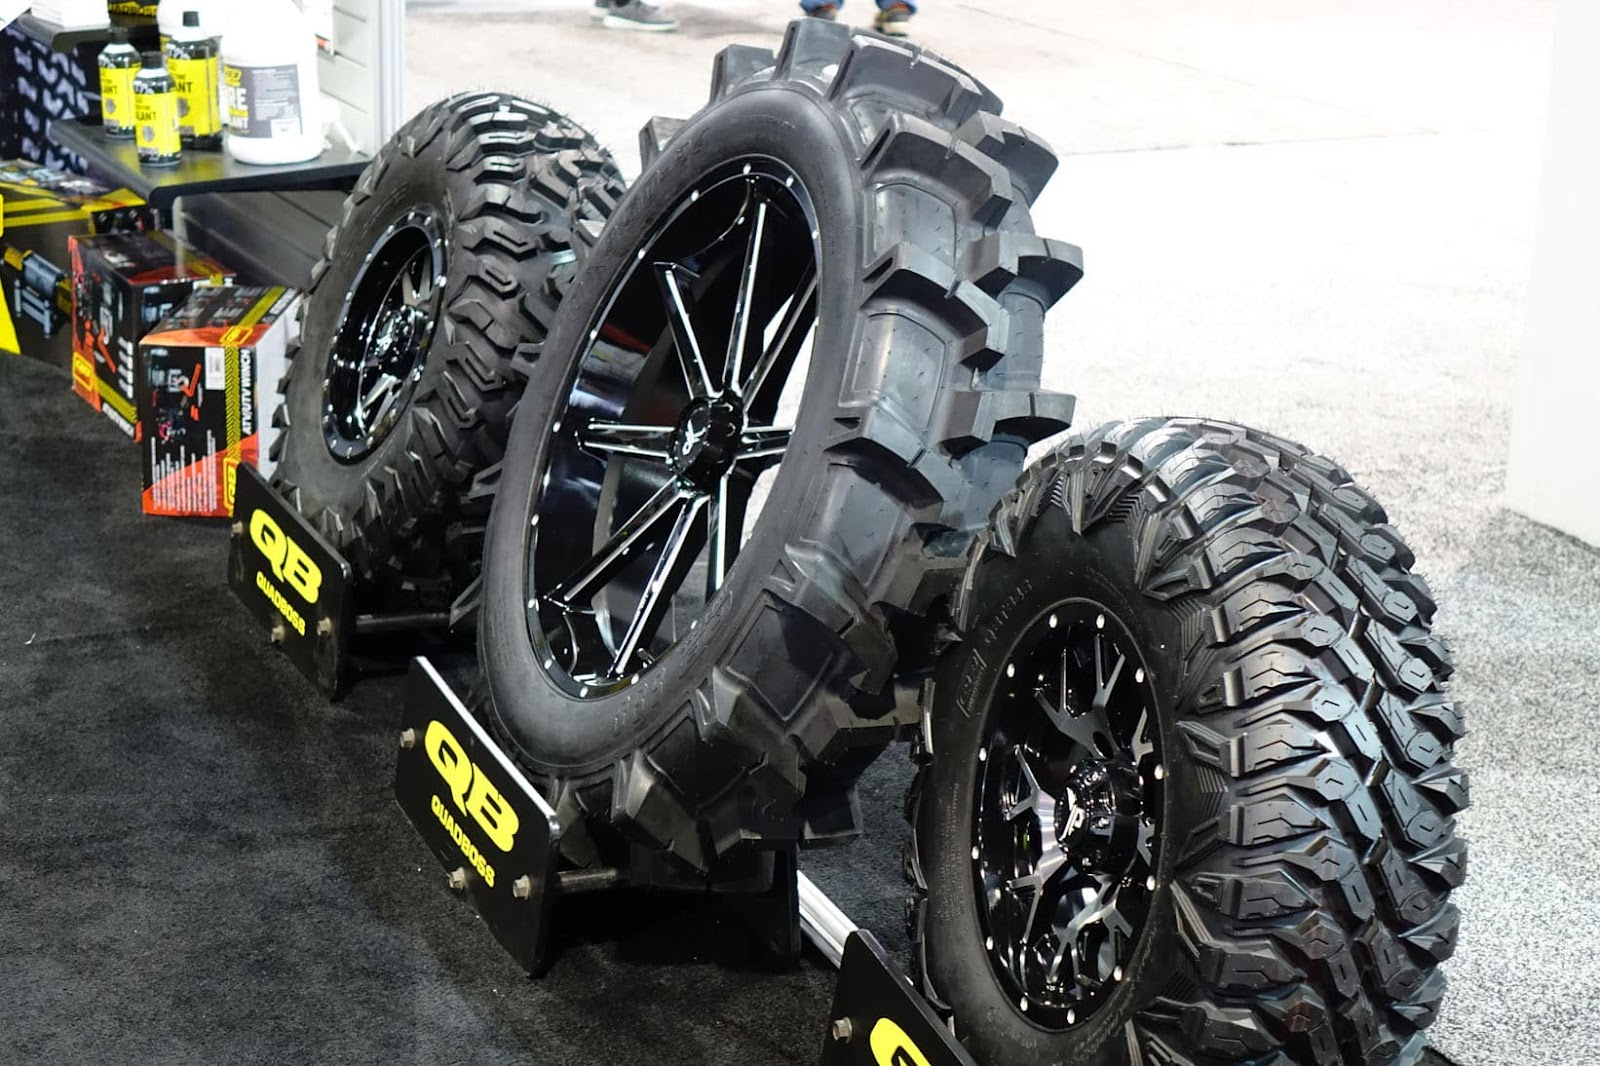 Leading tire vendors showcasing cutting-edge products at AIMExpo trade show